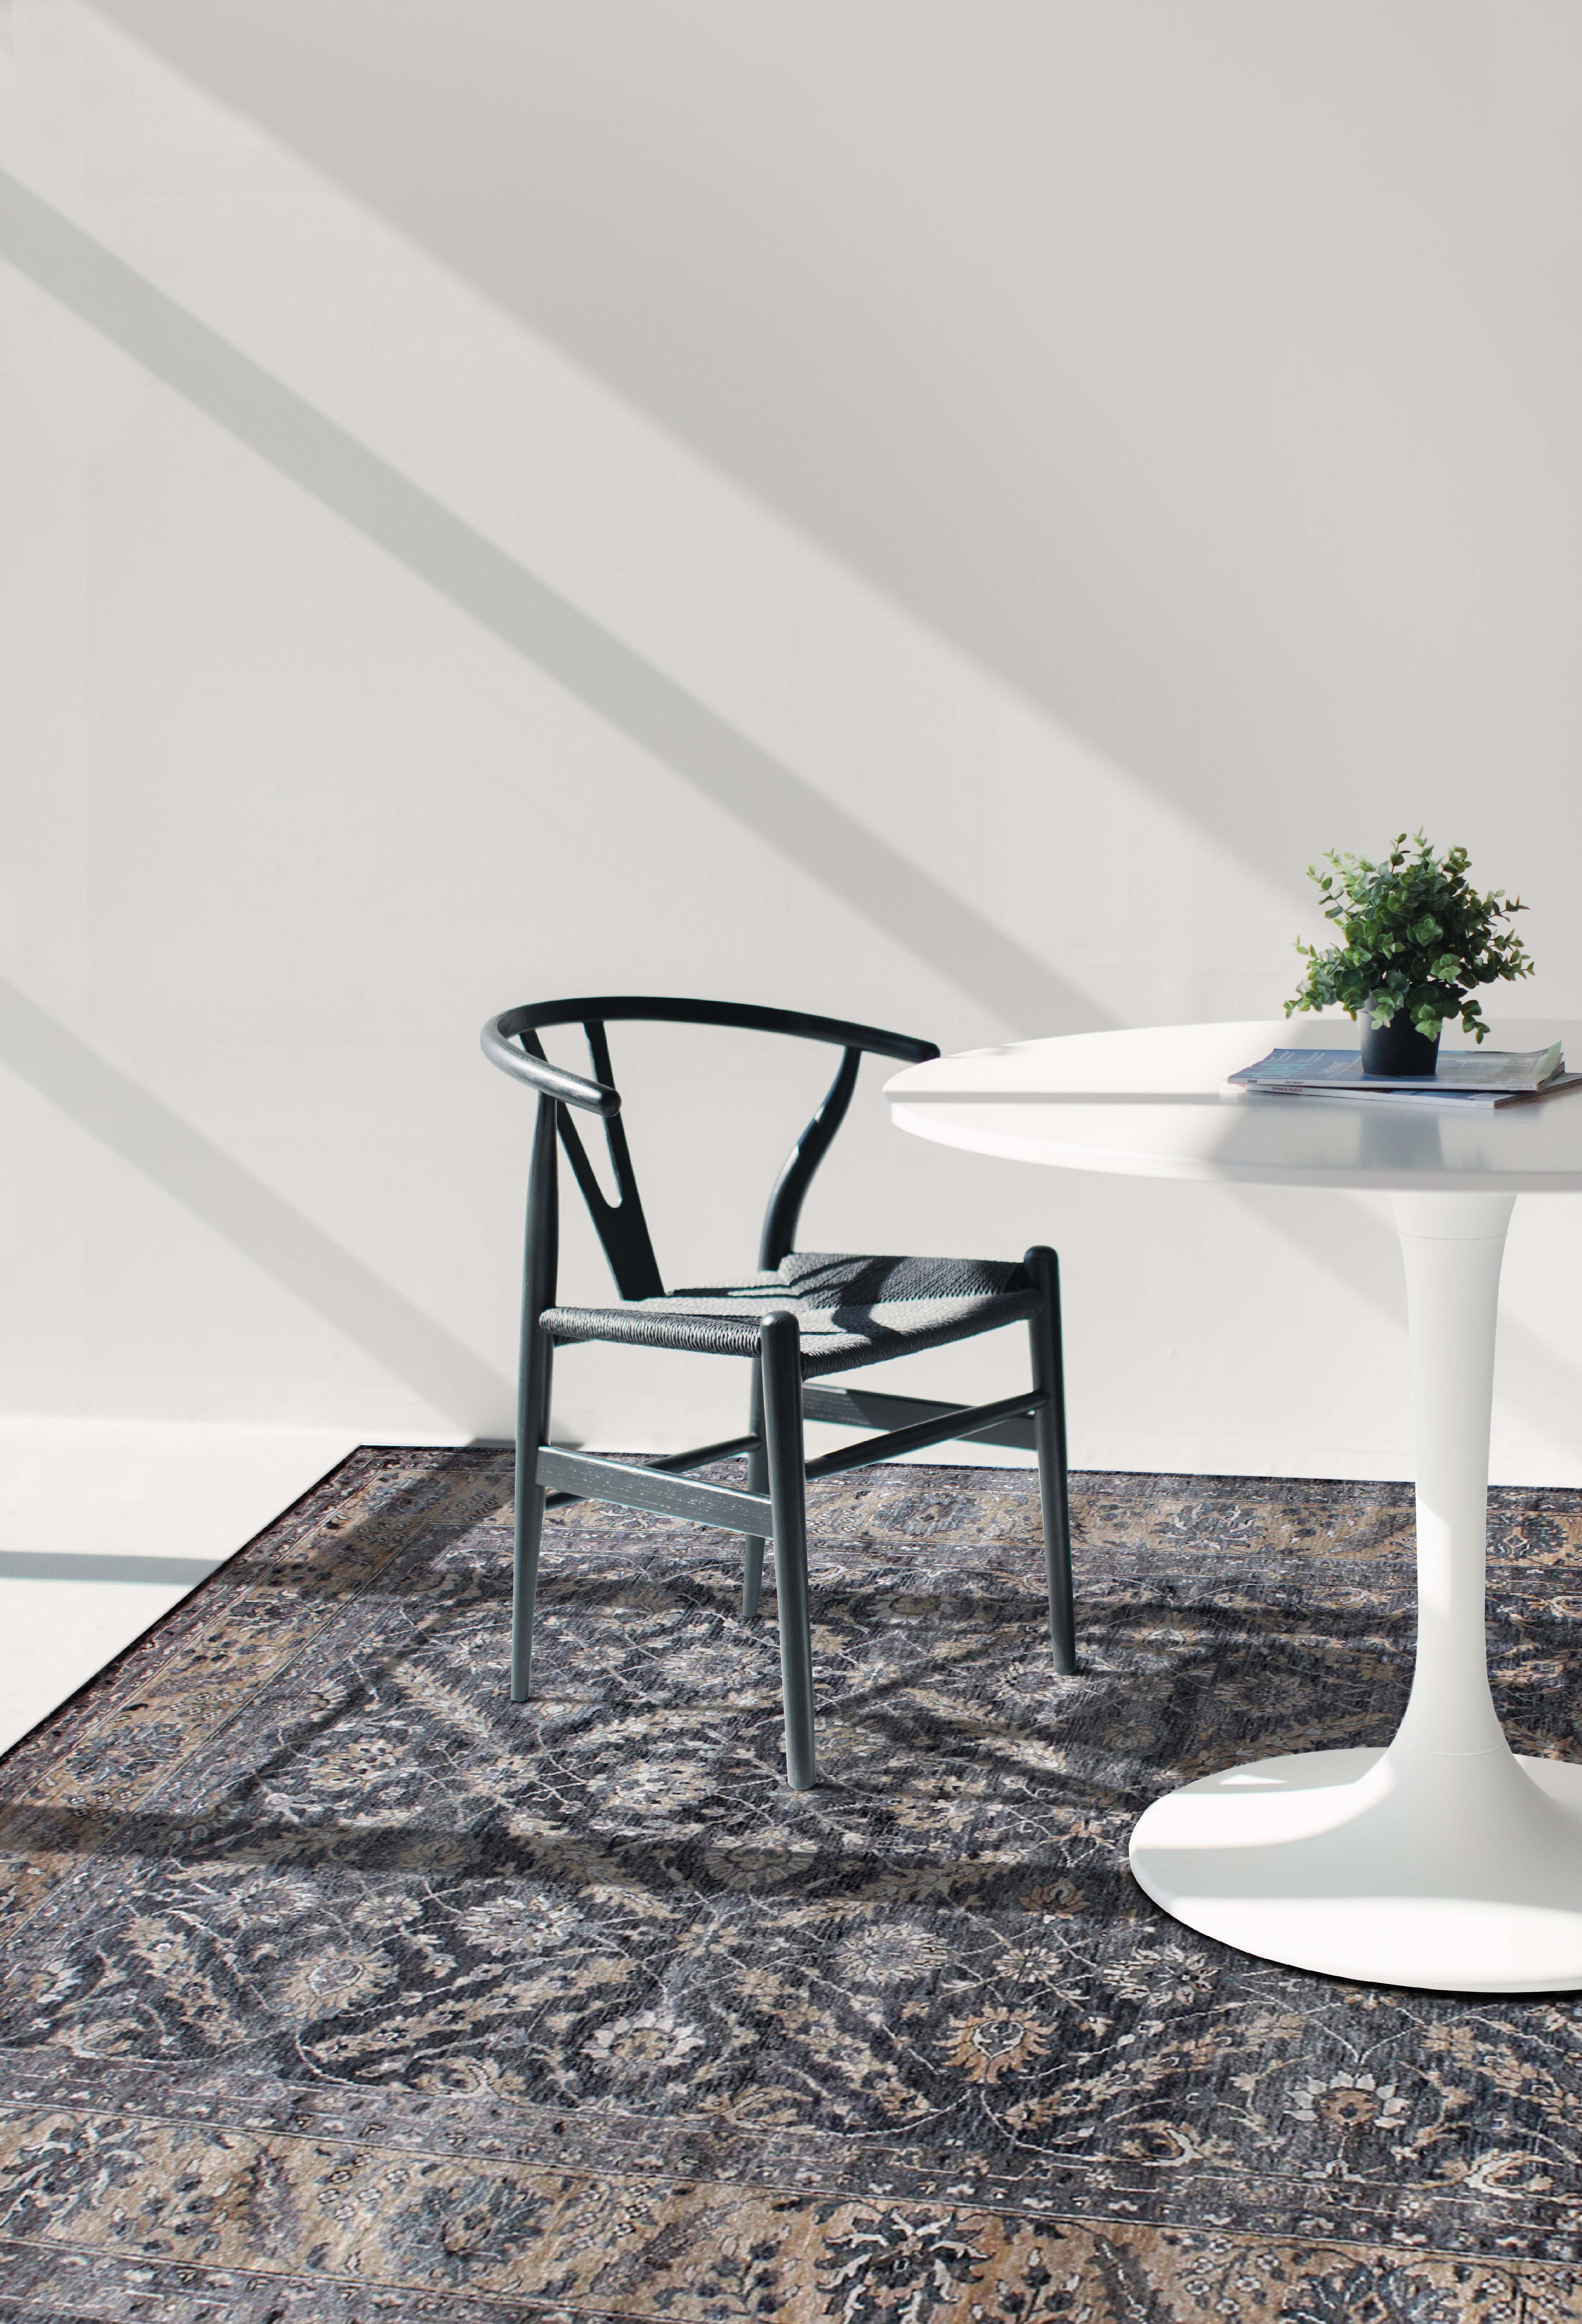 Characterizing beauty and elegance, the Amberlynn collection of luxury carpets and rugs adds a new and exciting dimension to the Living Room and Dining Room interiors.

This signature collection of fine handmade carpets stands out as a royal love